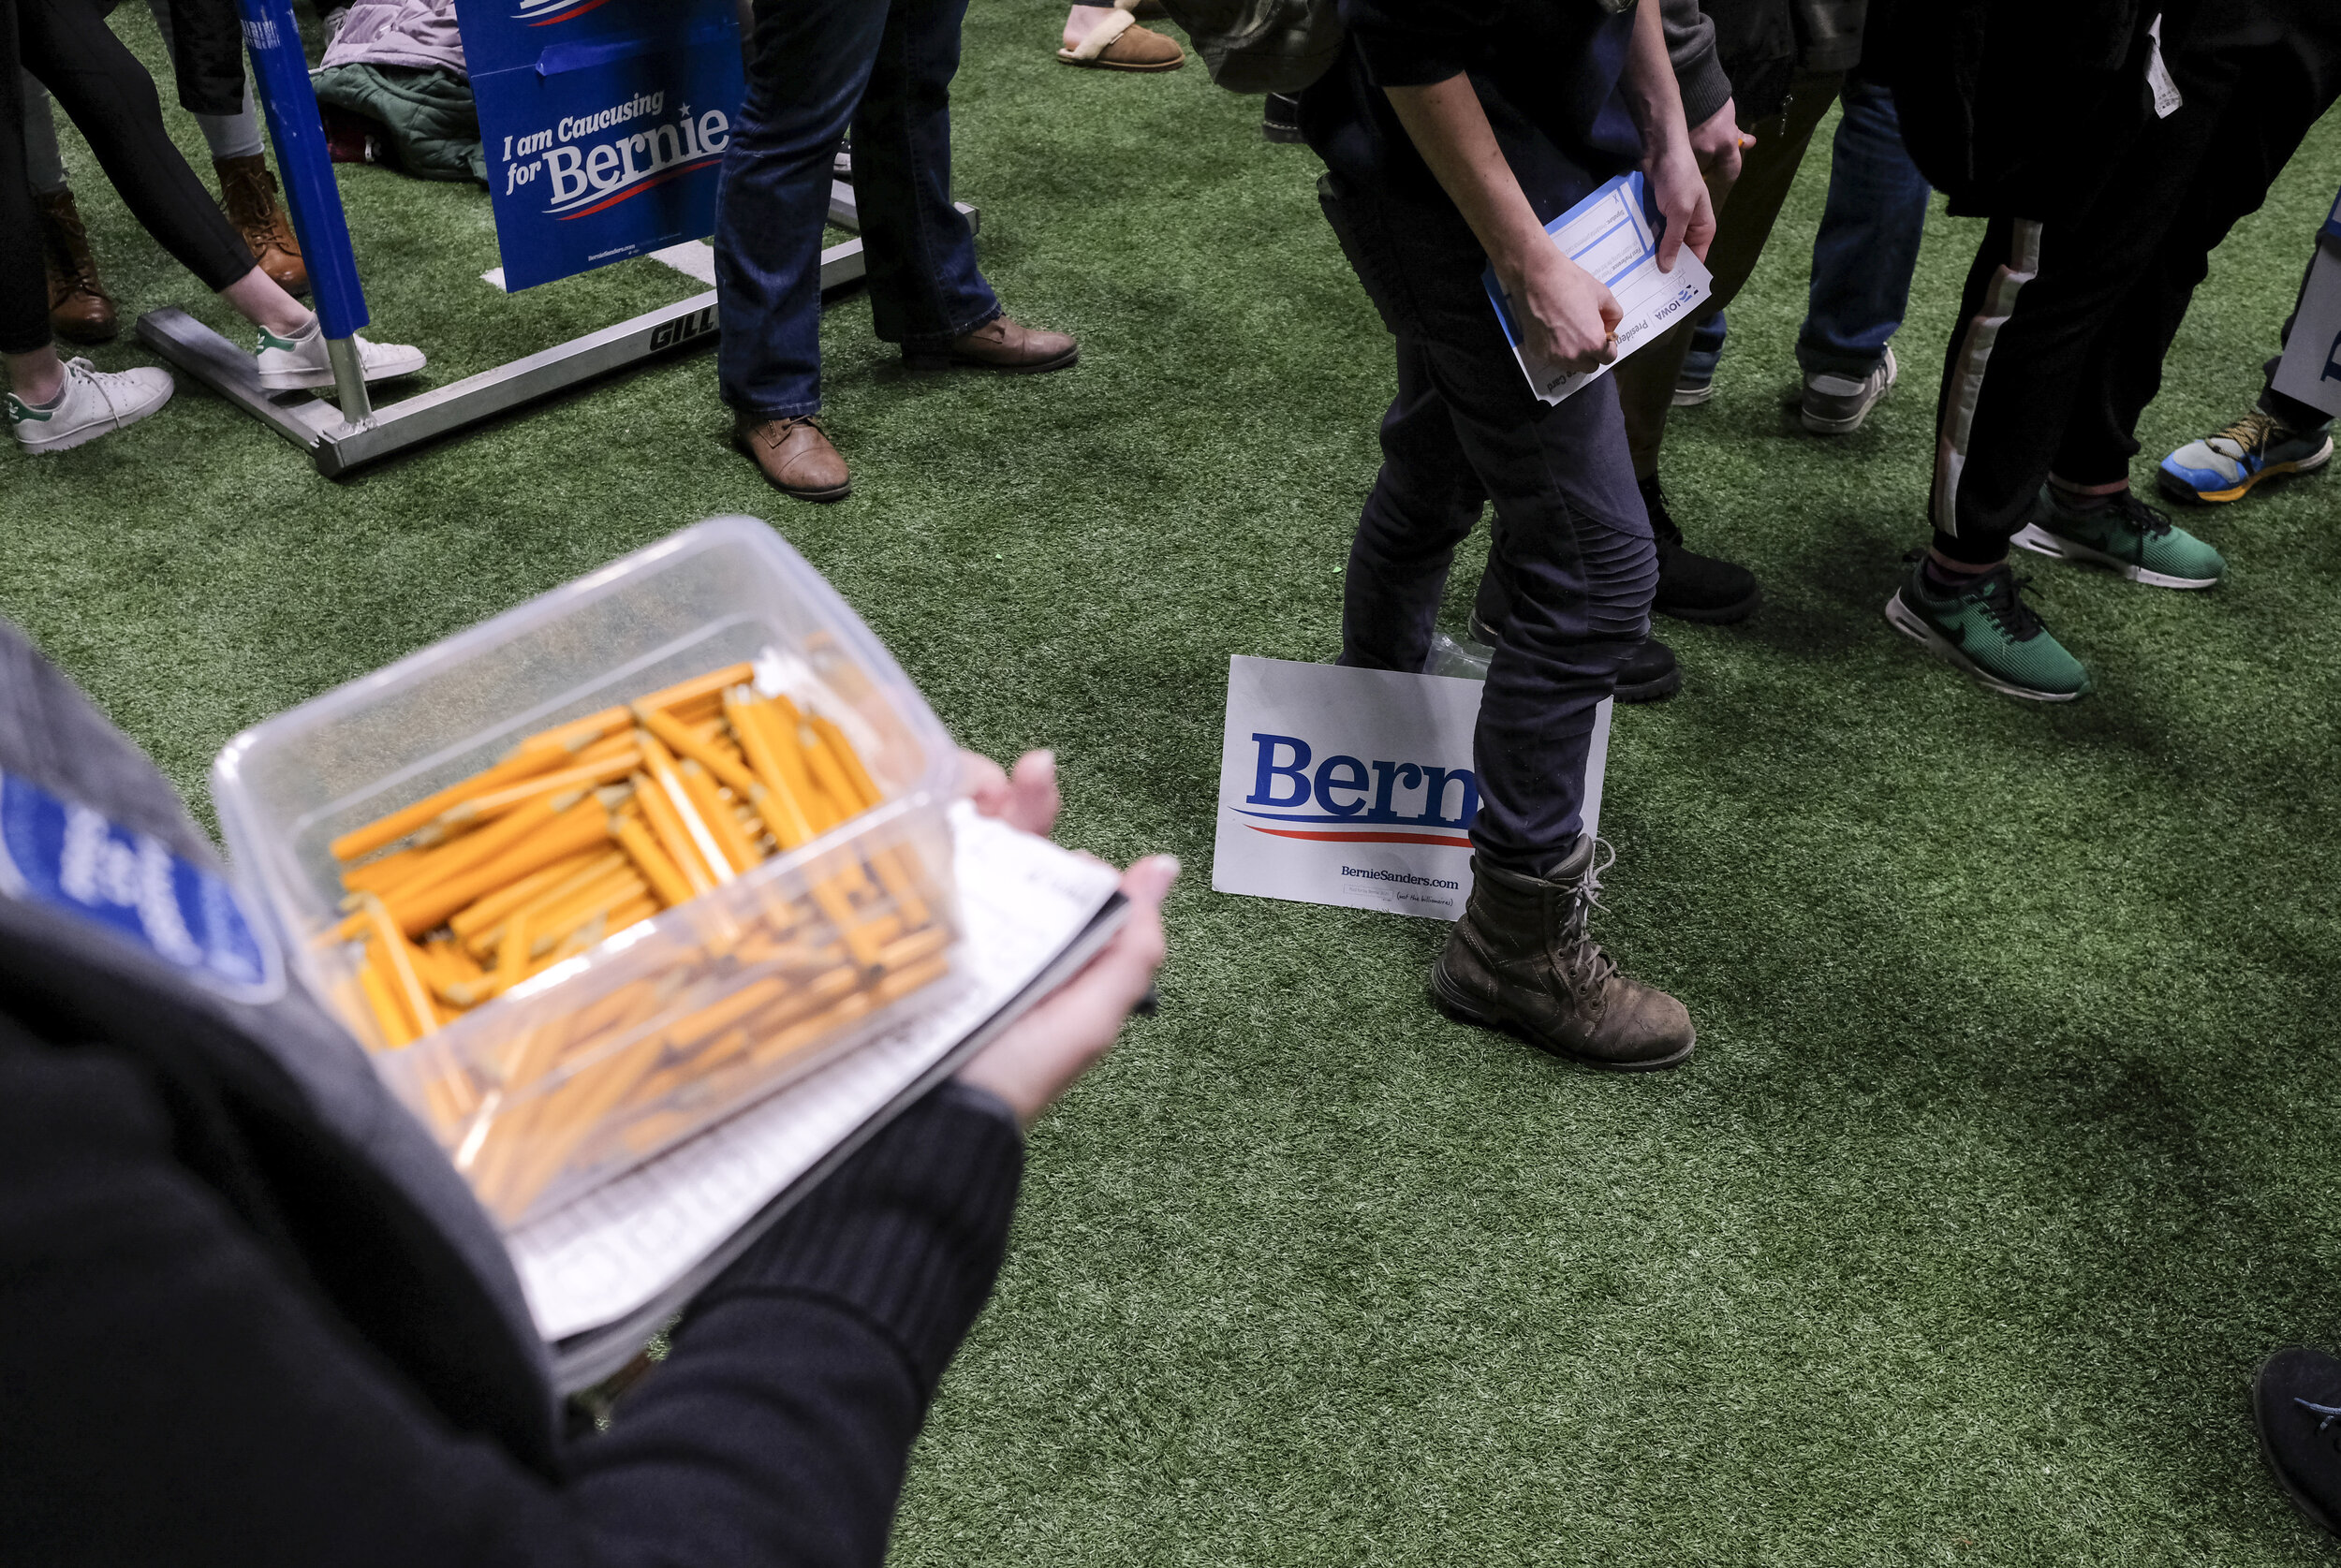  Voters casting their ballots for Bernie Sanders gathered together and fill out forms on Iowa Caucus night at Drake University in Des Moines, Iowa on February 3, 2020. 